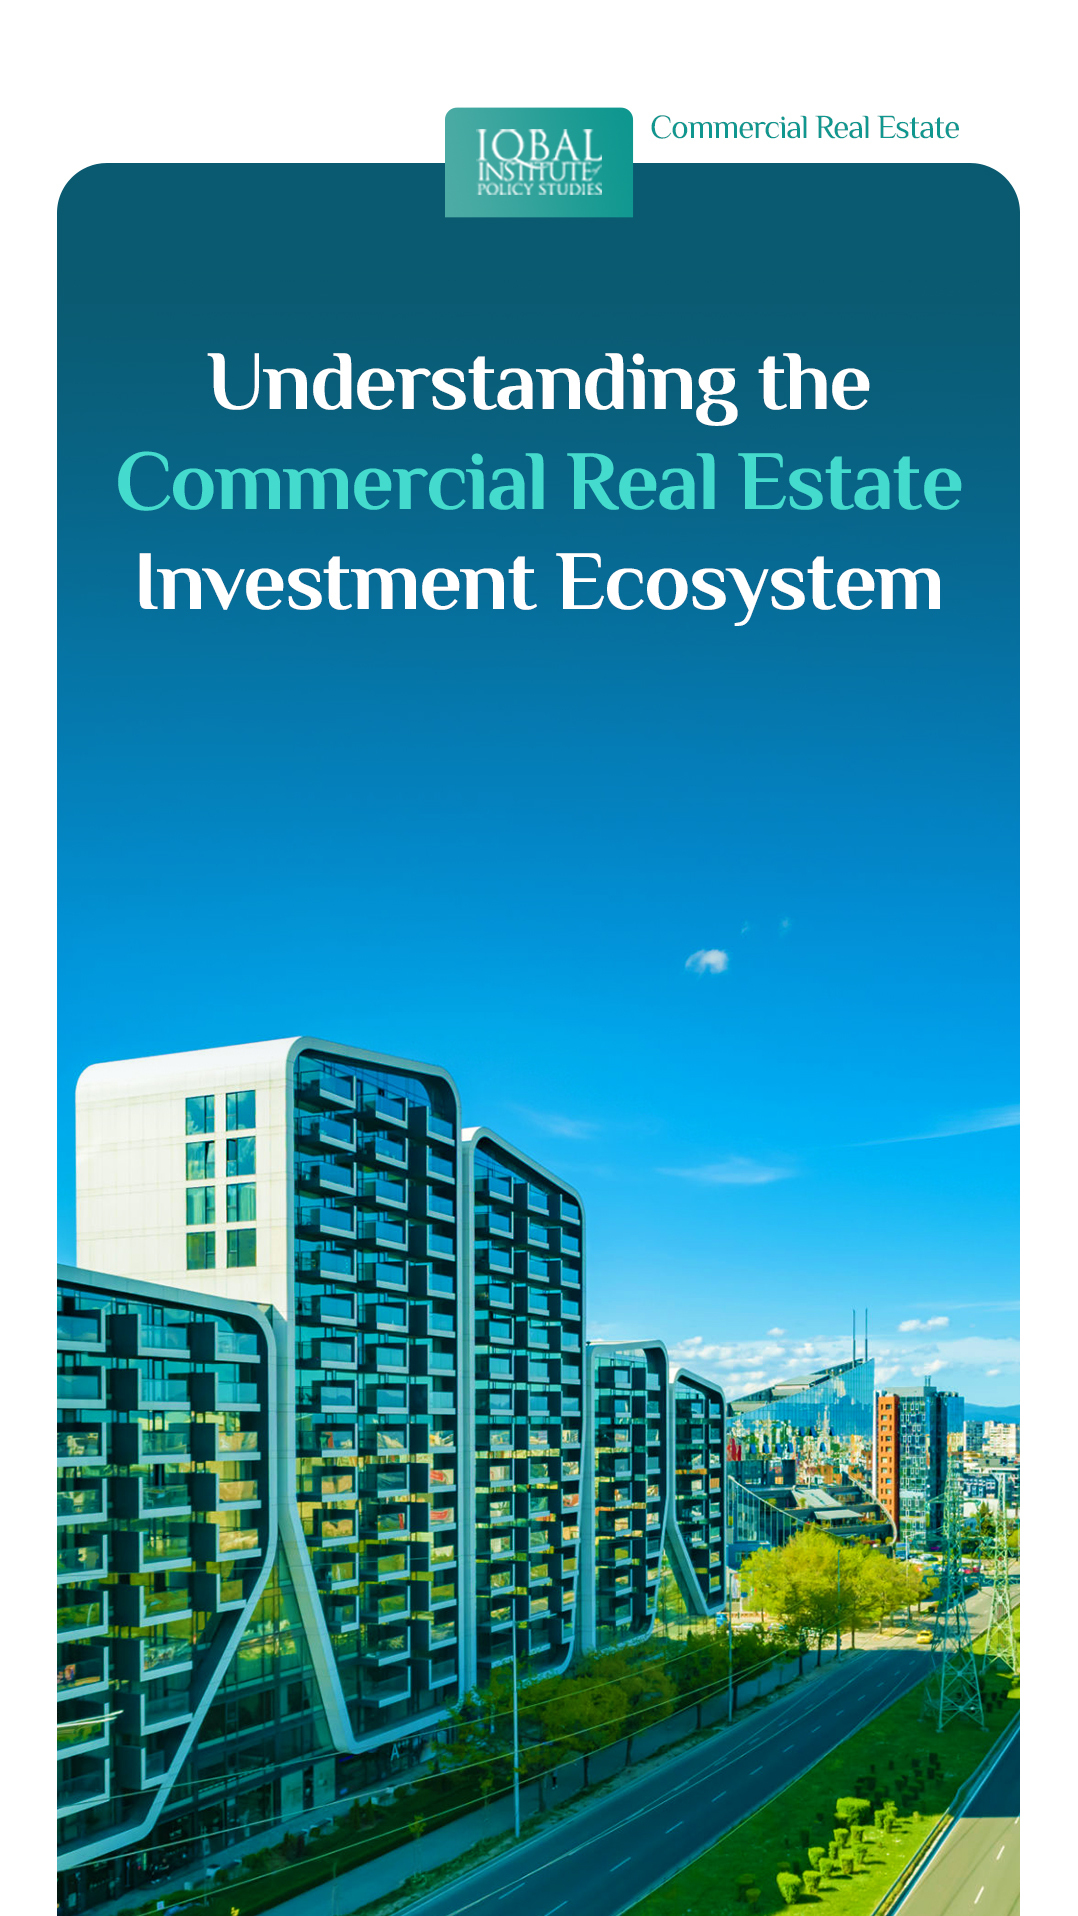 Understanding the Commercial Real Estate Investment Ecosystem